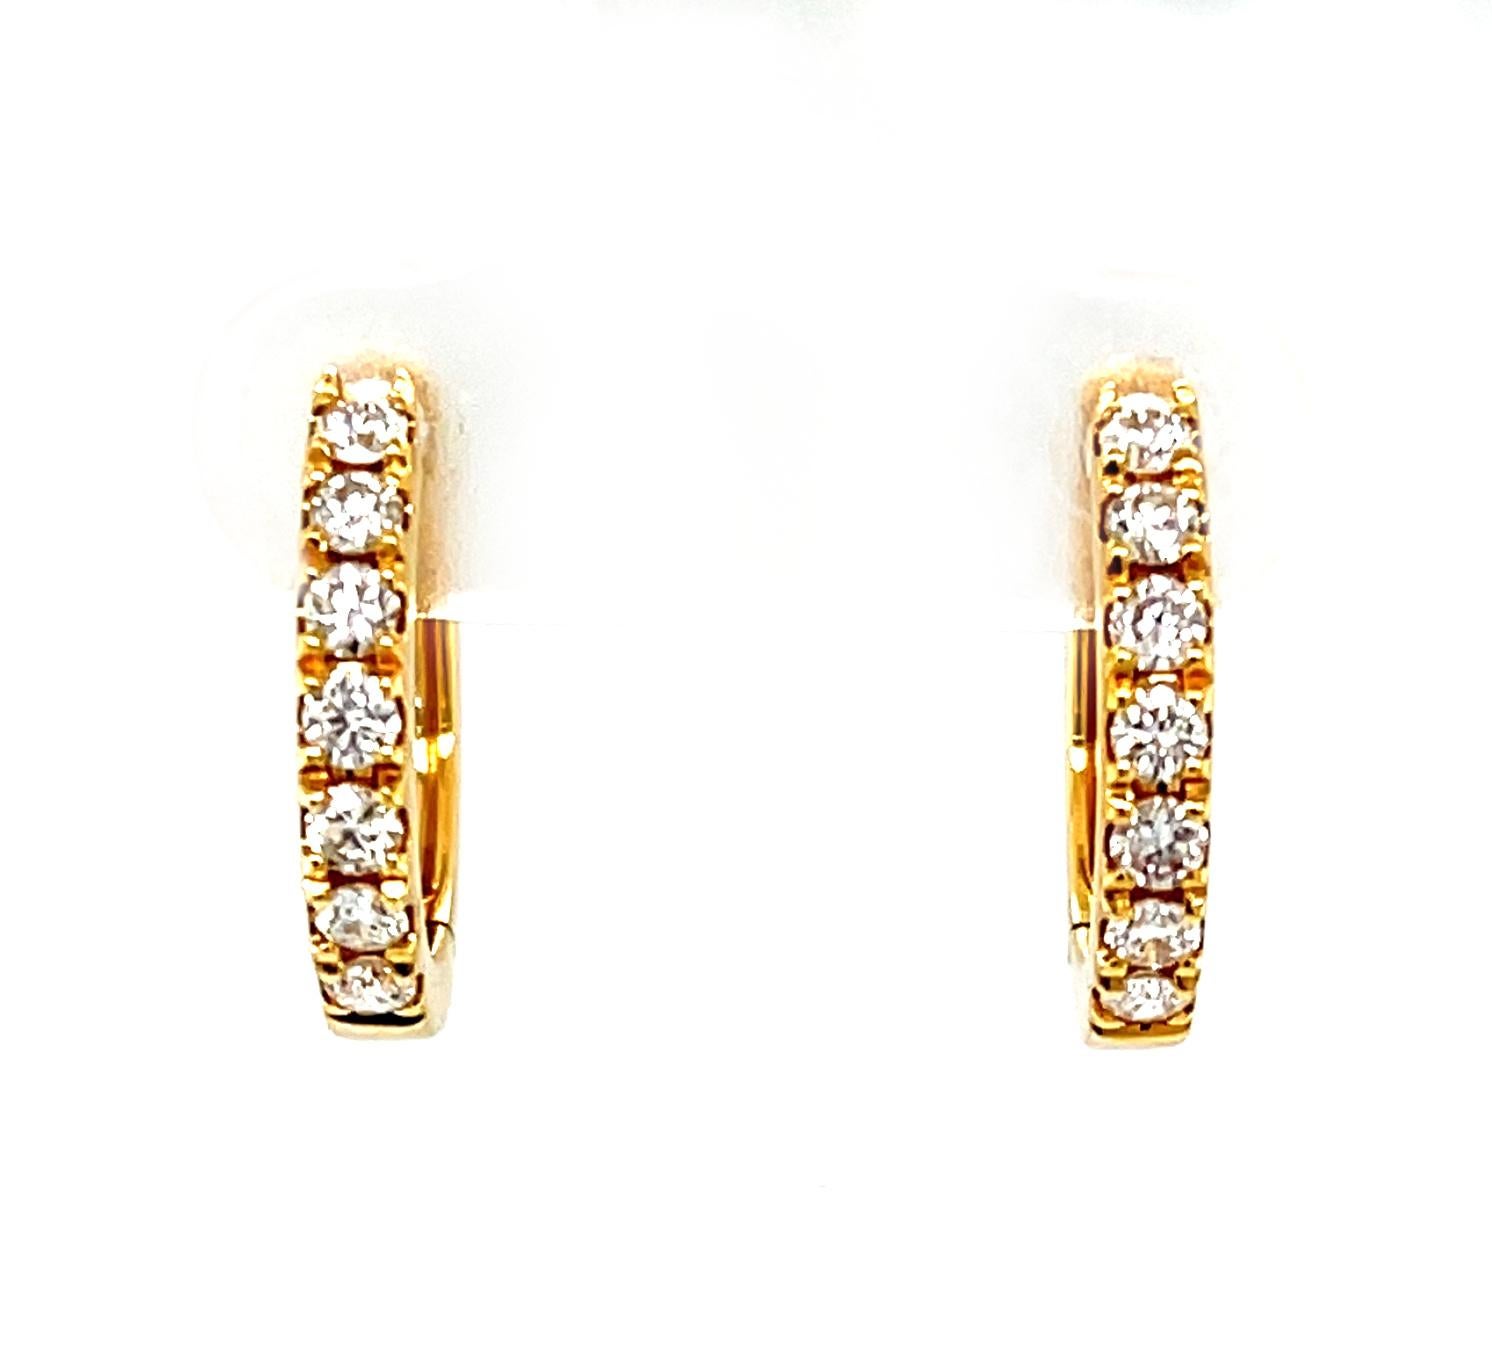 Diamond hoop earrings are a staple in any fine jewelry wardrobe, and this beautiful pair is perfect for both everyday and special occasions! These lovely hoops feature sparkling round brilliant-cut diamonds set in 18k yellow gold and a hinged back